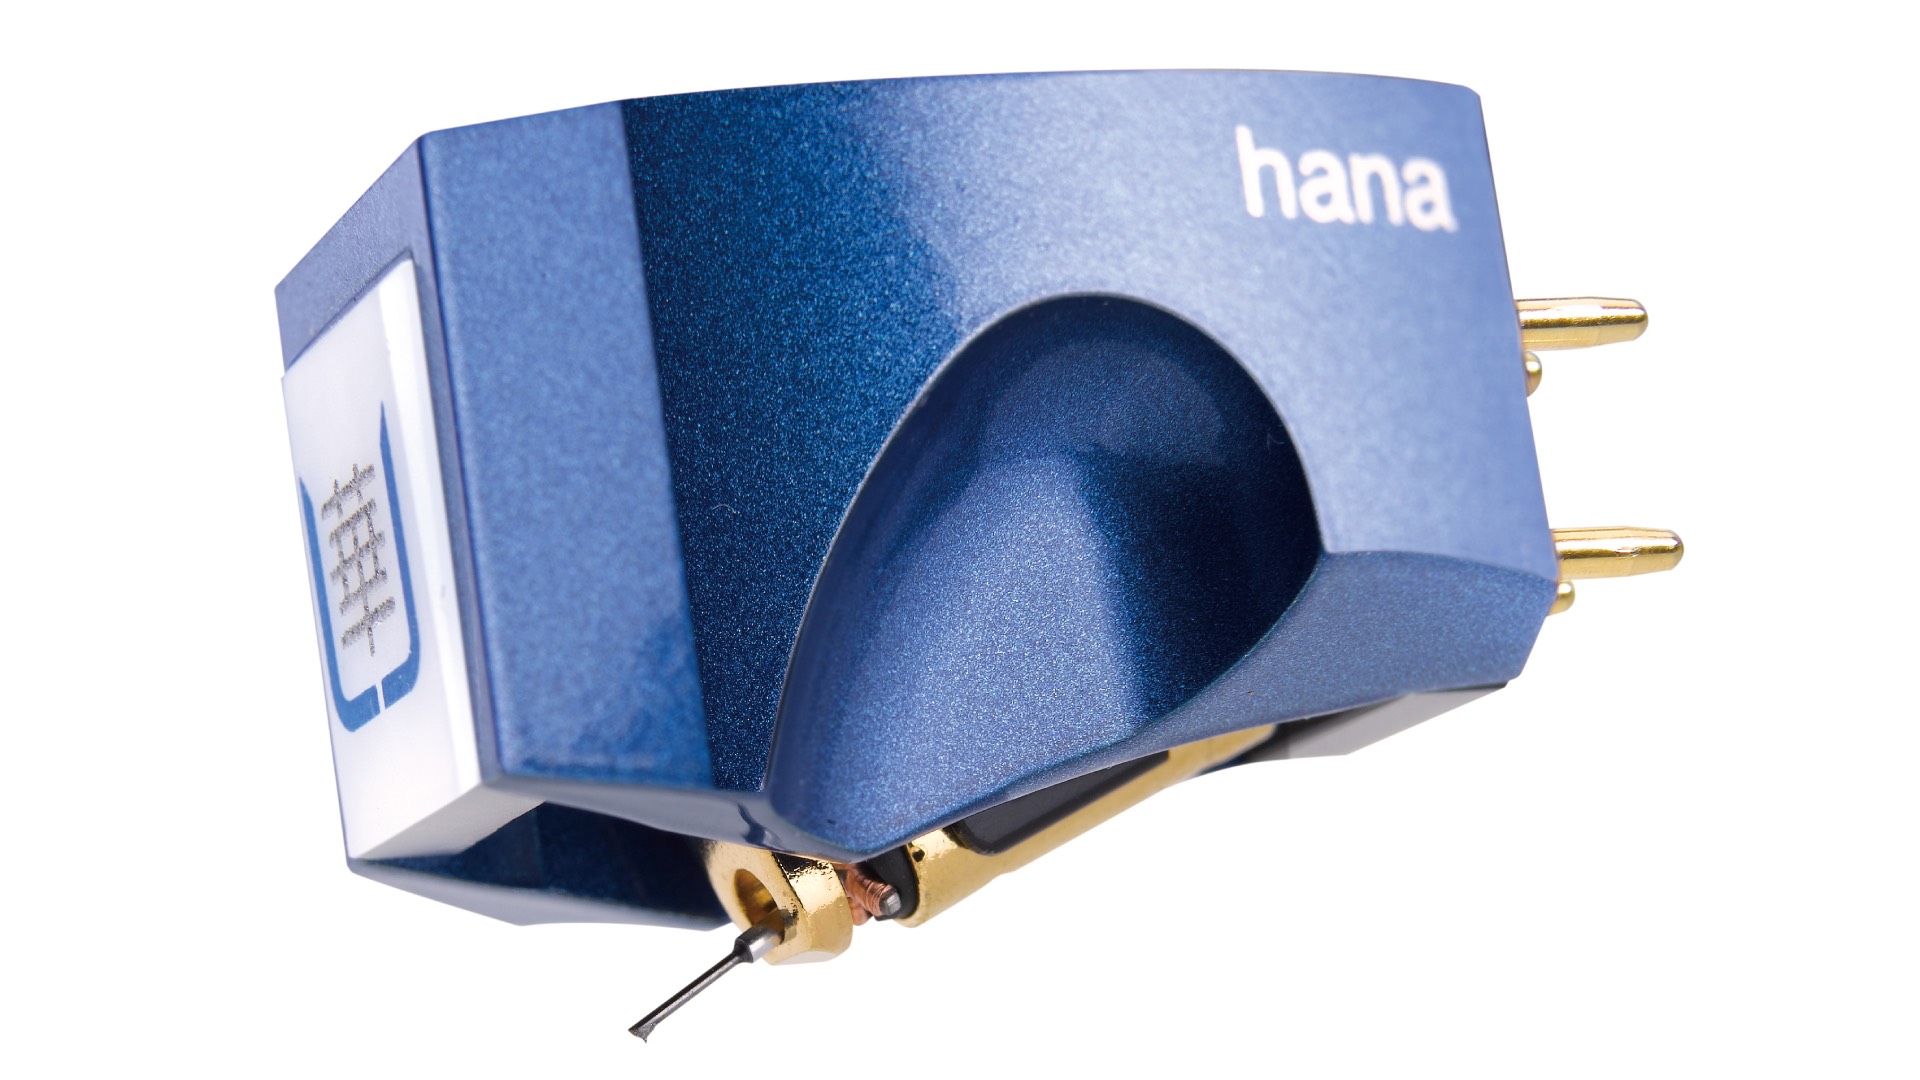 With the Blue, Hana launches another "Umami" model under its top MC cartridge Umami Red. (Image Credit: Hana)